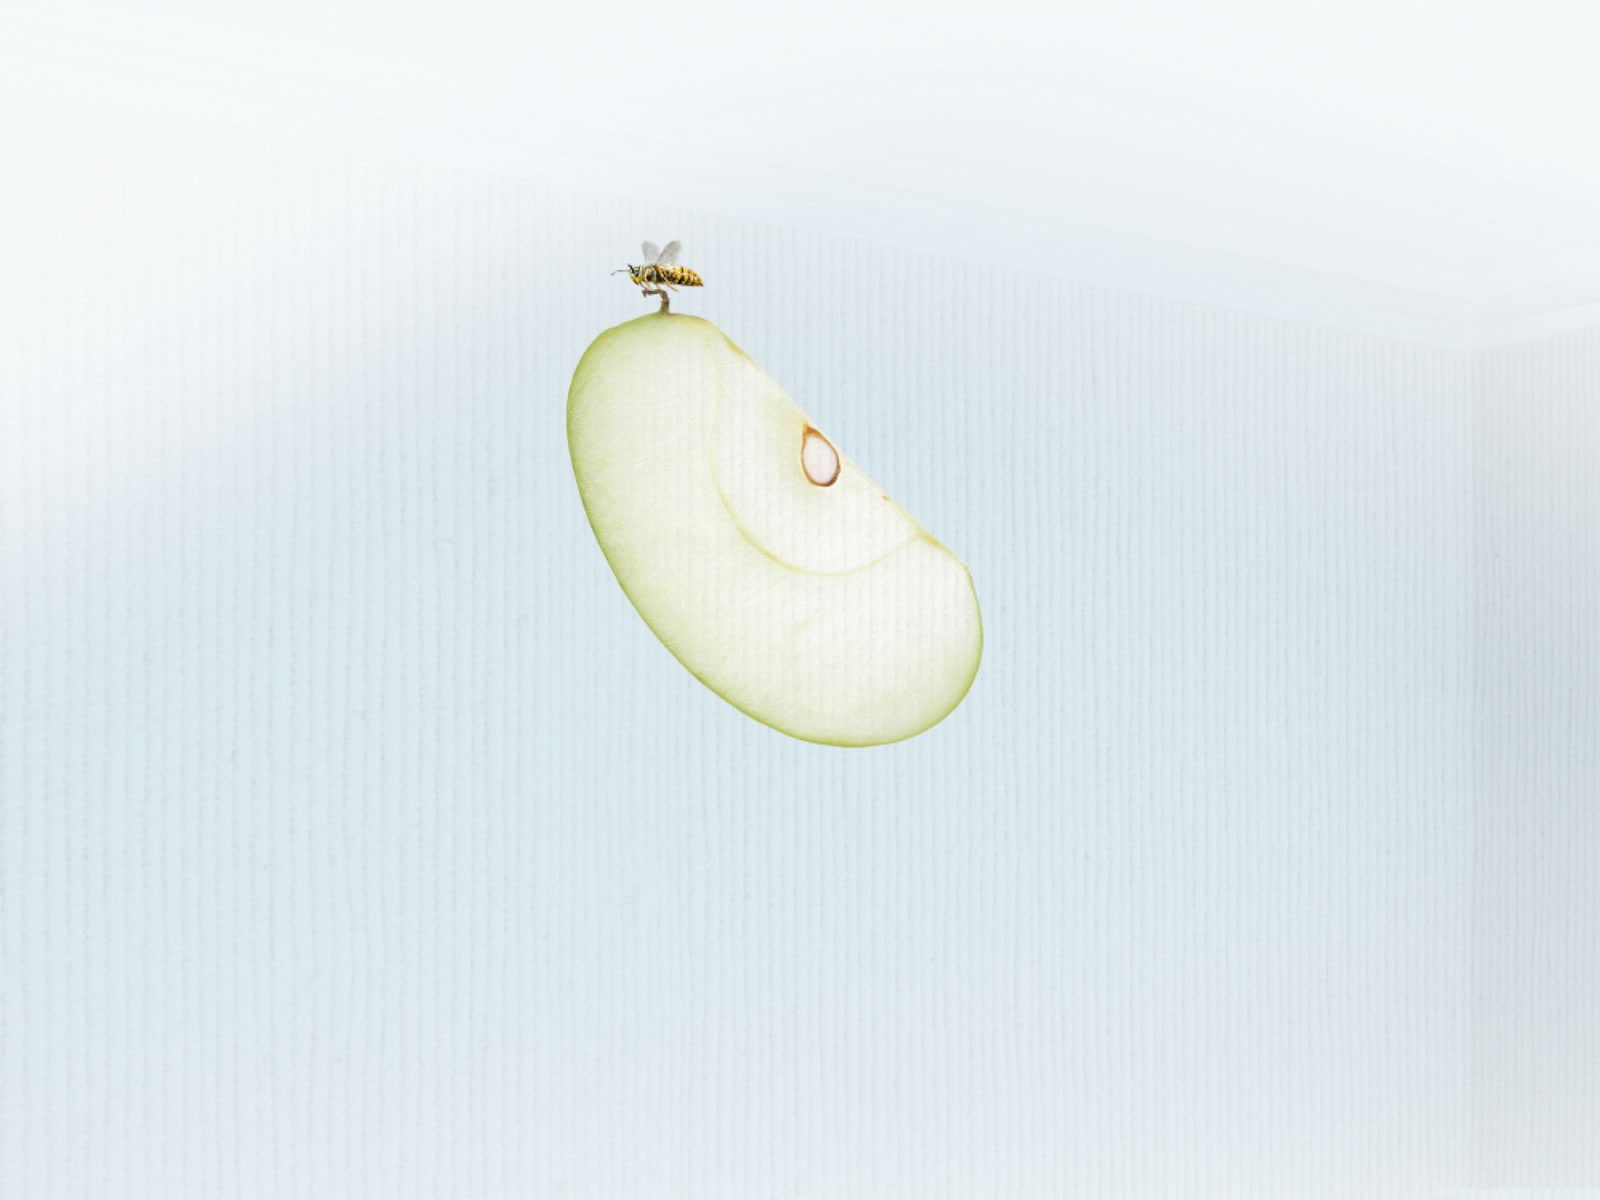 insect, apples, minimalism, healthy eating, fruit, food and drink